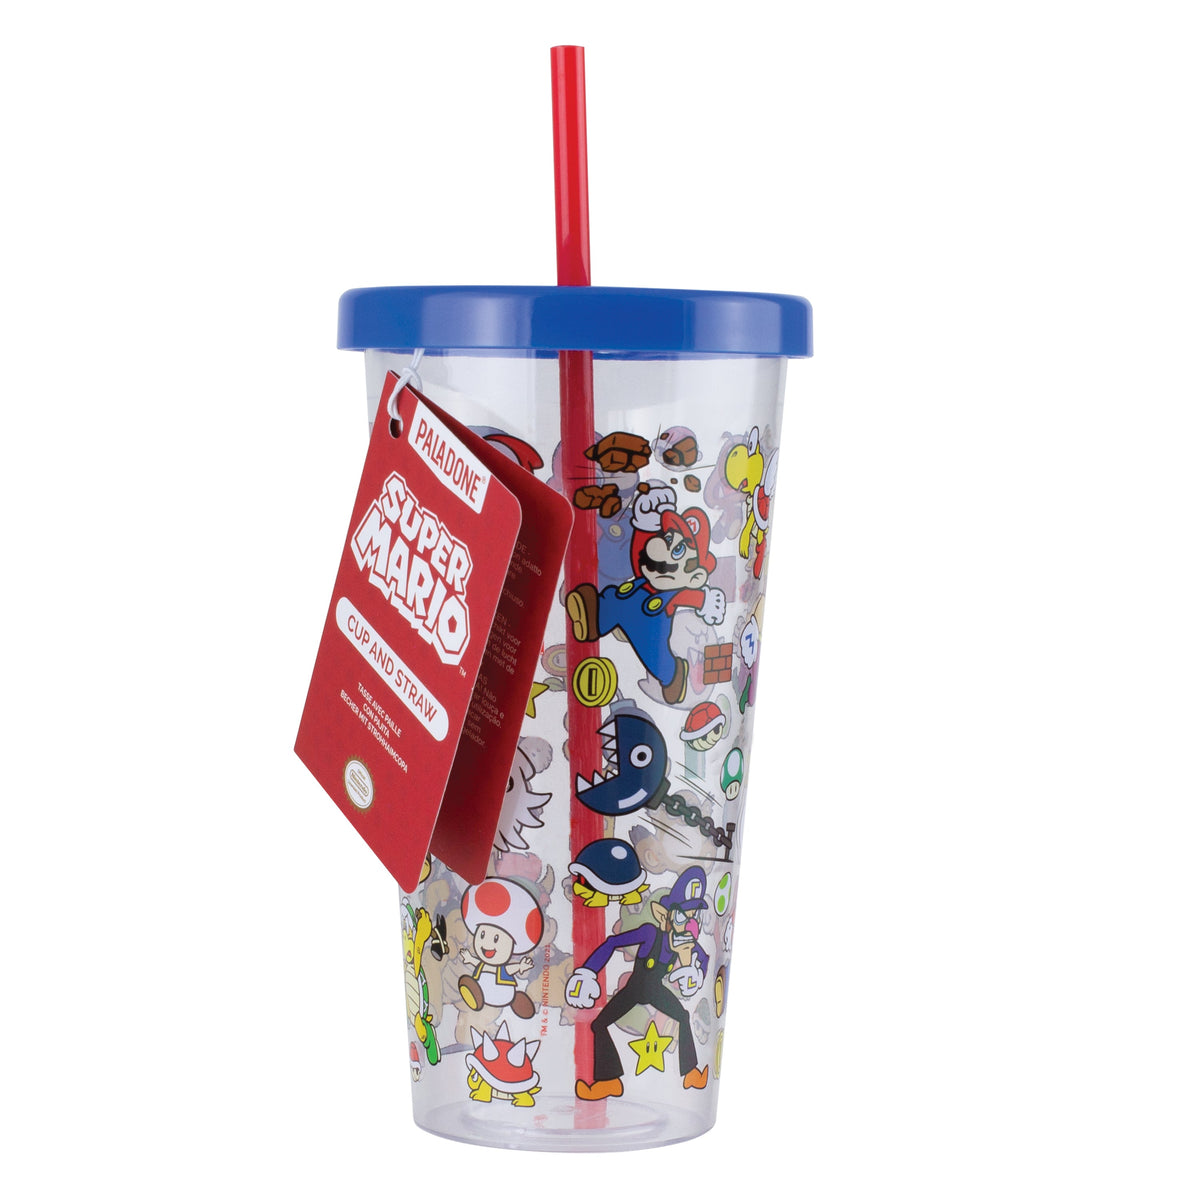 PALADONE PRODUCTS INC. Novelties Super Mario Plastic Cup with Straw 5055964767501